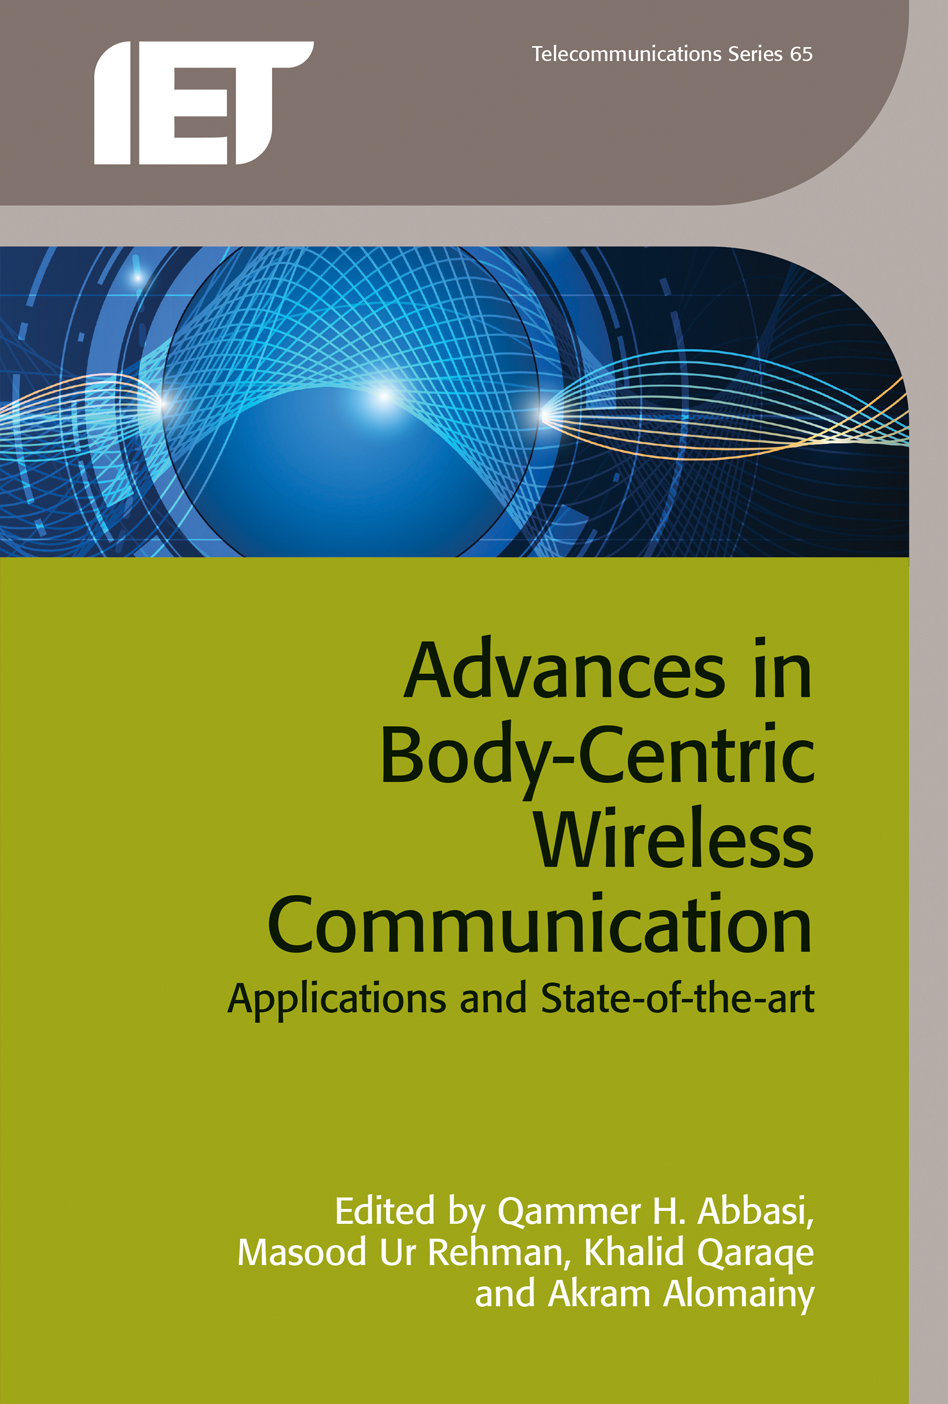 Advances in Body-Centric Wireless Communication, Applications and state-of-the-art